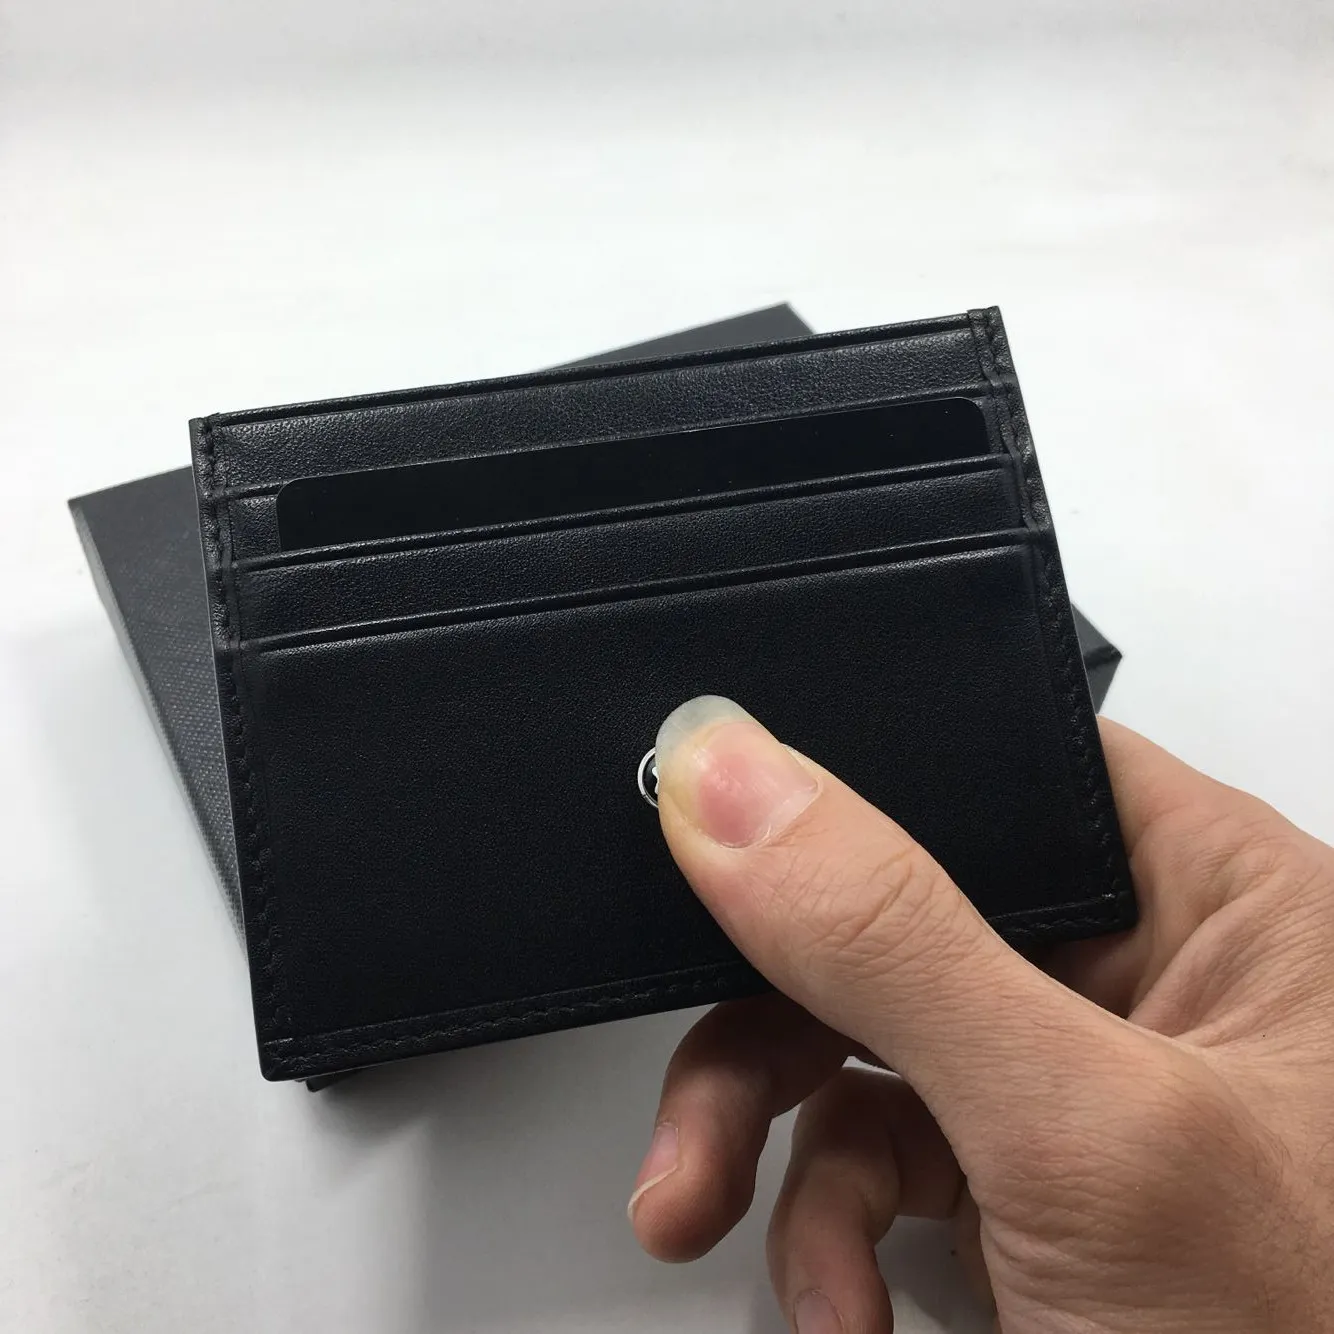 Black Genuine Leather Credit Card Holder Business Men High Quality Slim Bank Card Case 2017 New Arrivals Fashion ID Card Purse Fre3024